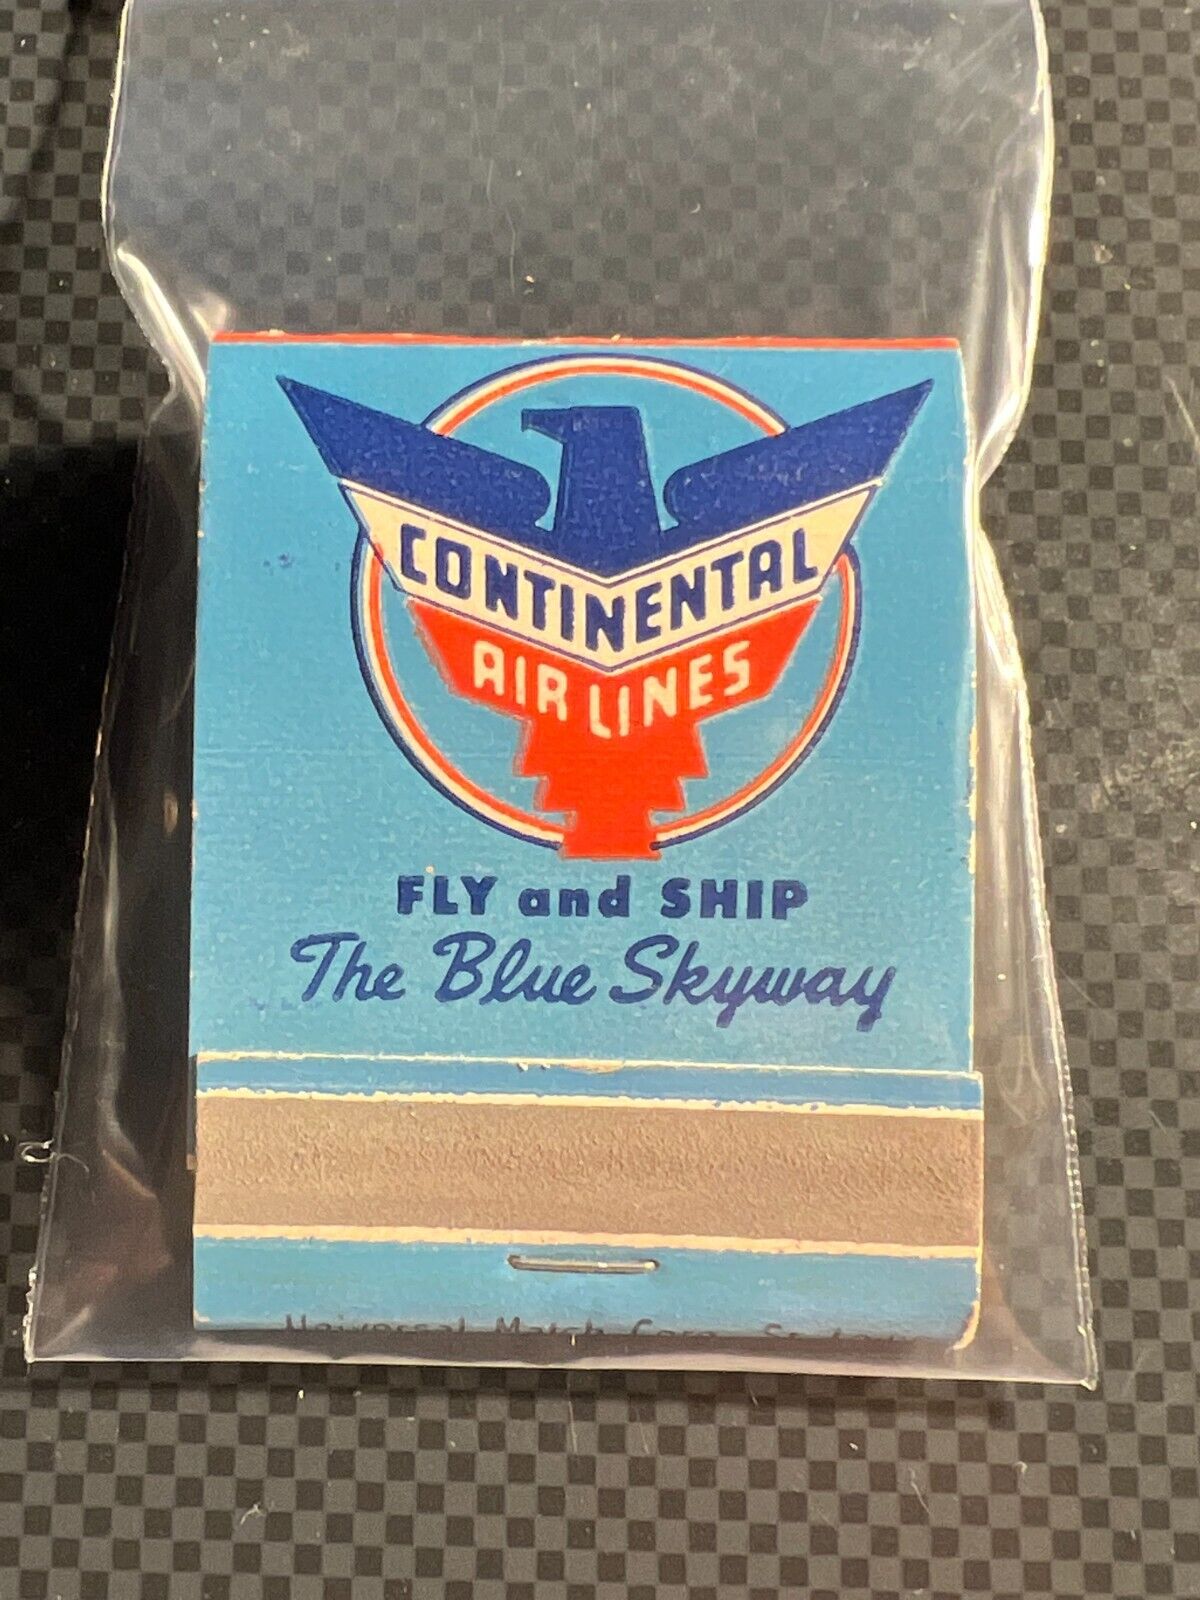 VINTAGE MATCHBOOK - CONTINENTAL AIR LINES - THE BLUE SKYWAY - PHILLIPS UNSTRUCK